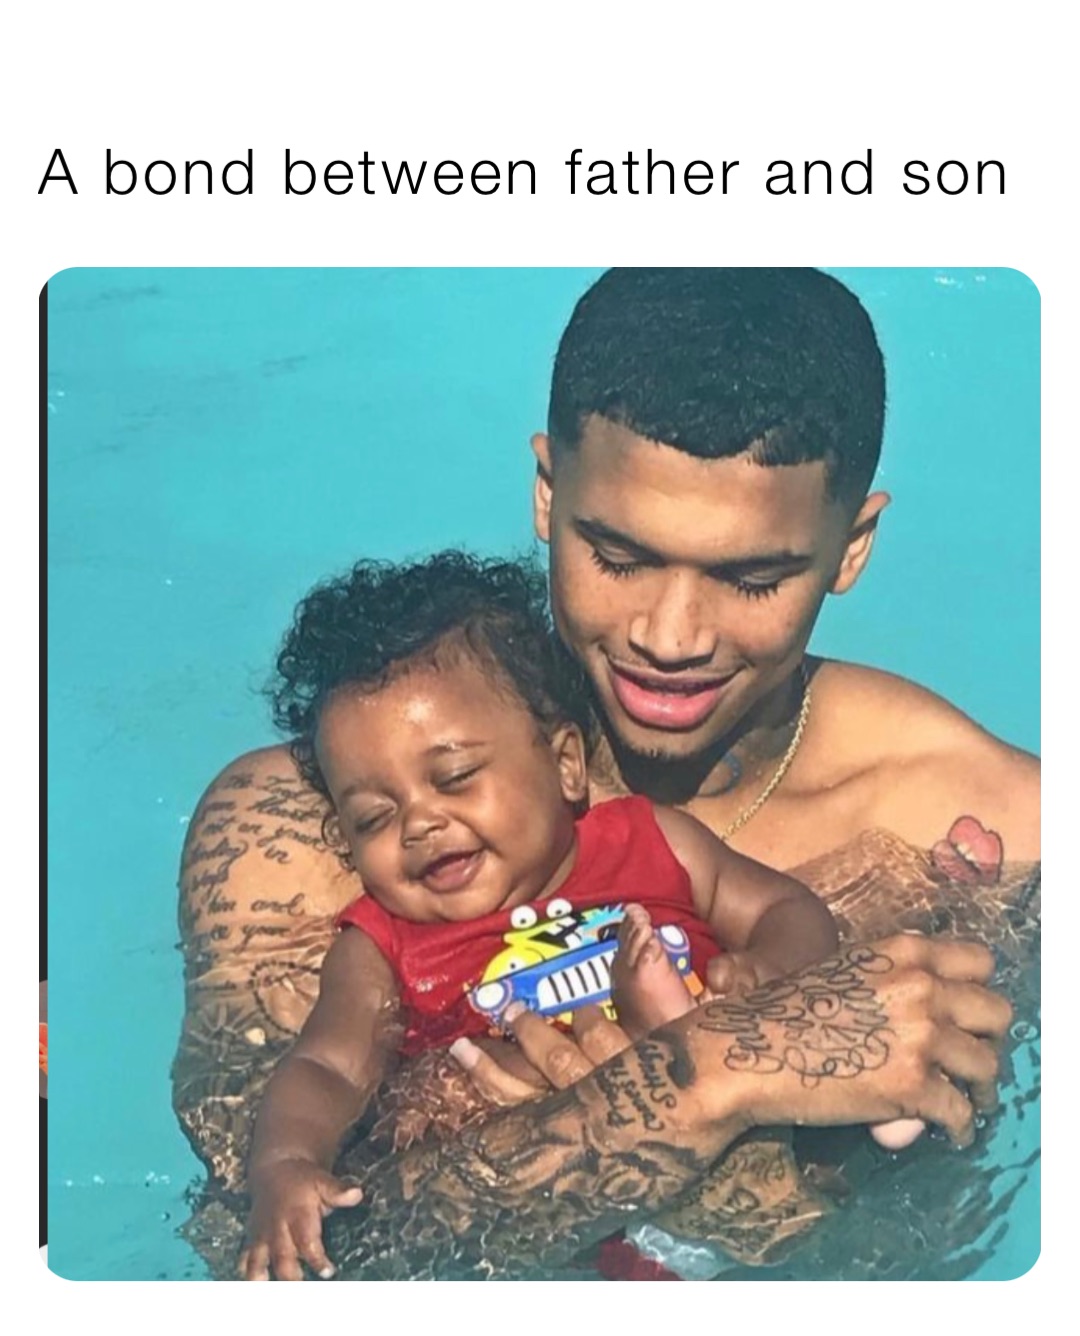 A bond between father and son